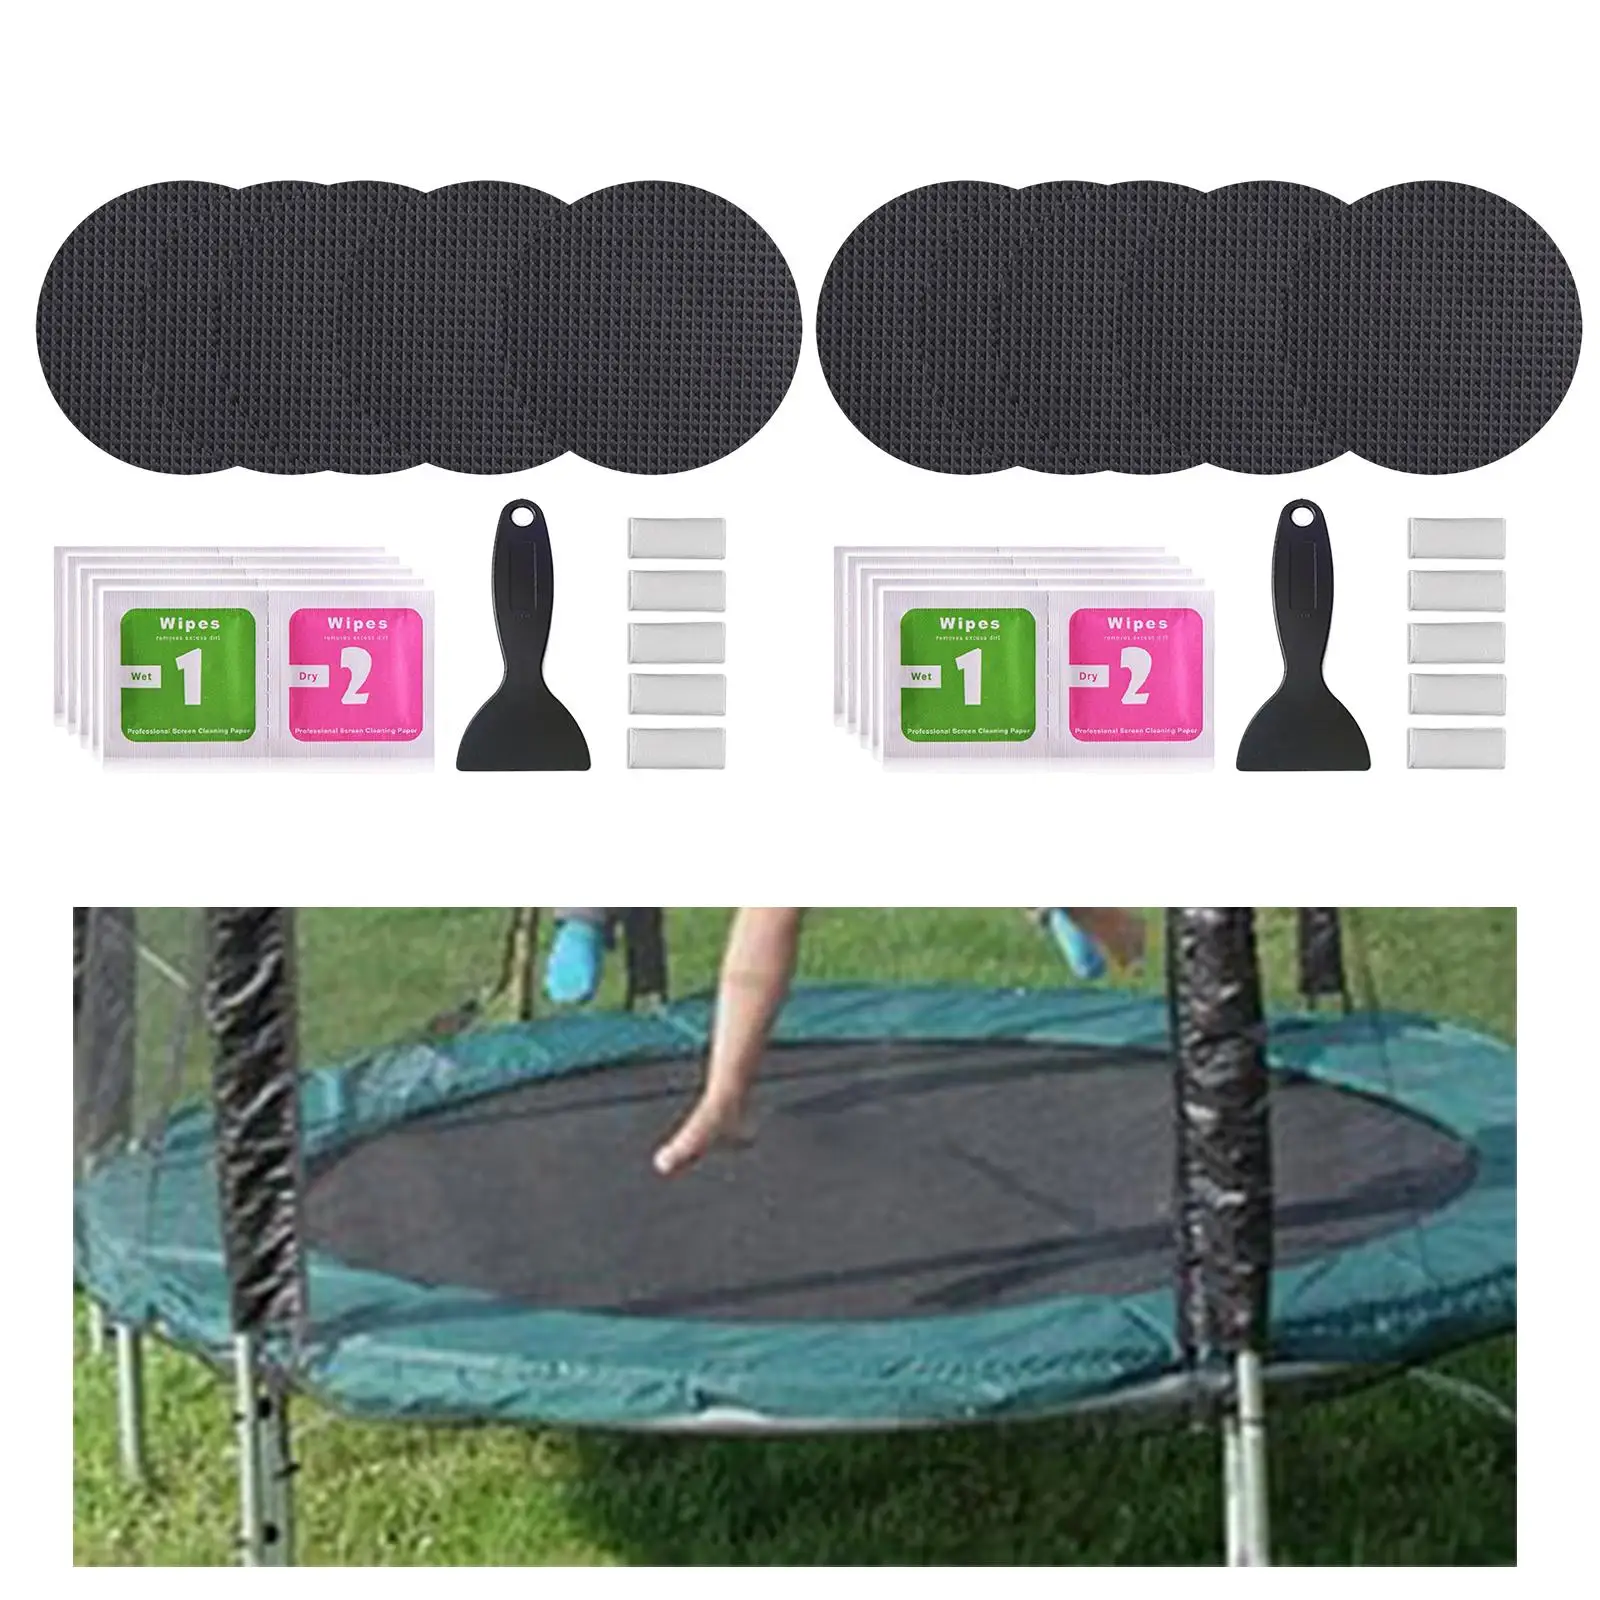 Professional Trampoline Patch Repair Kits Mesh Hole Patch for Garden Tent Repair